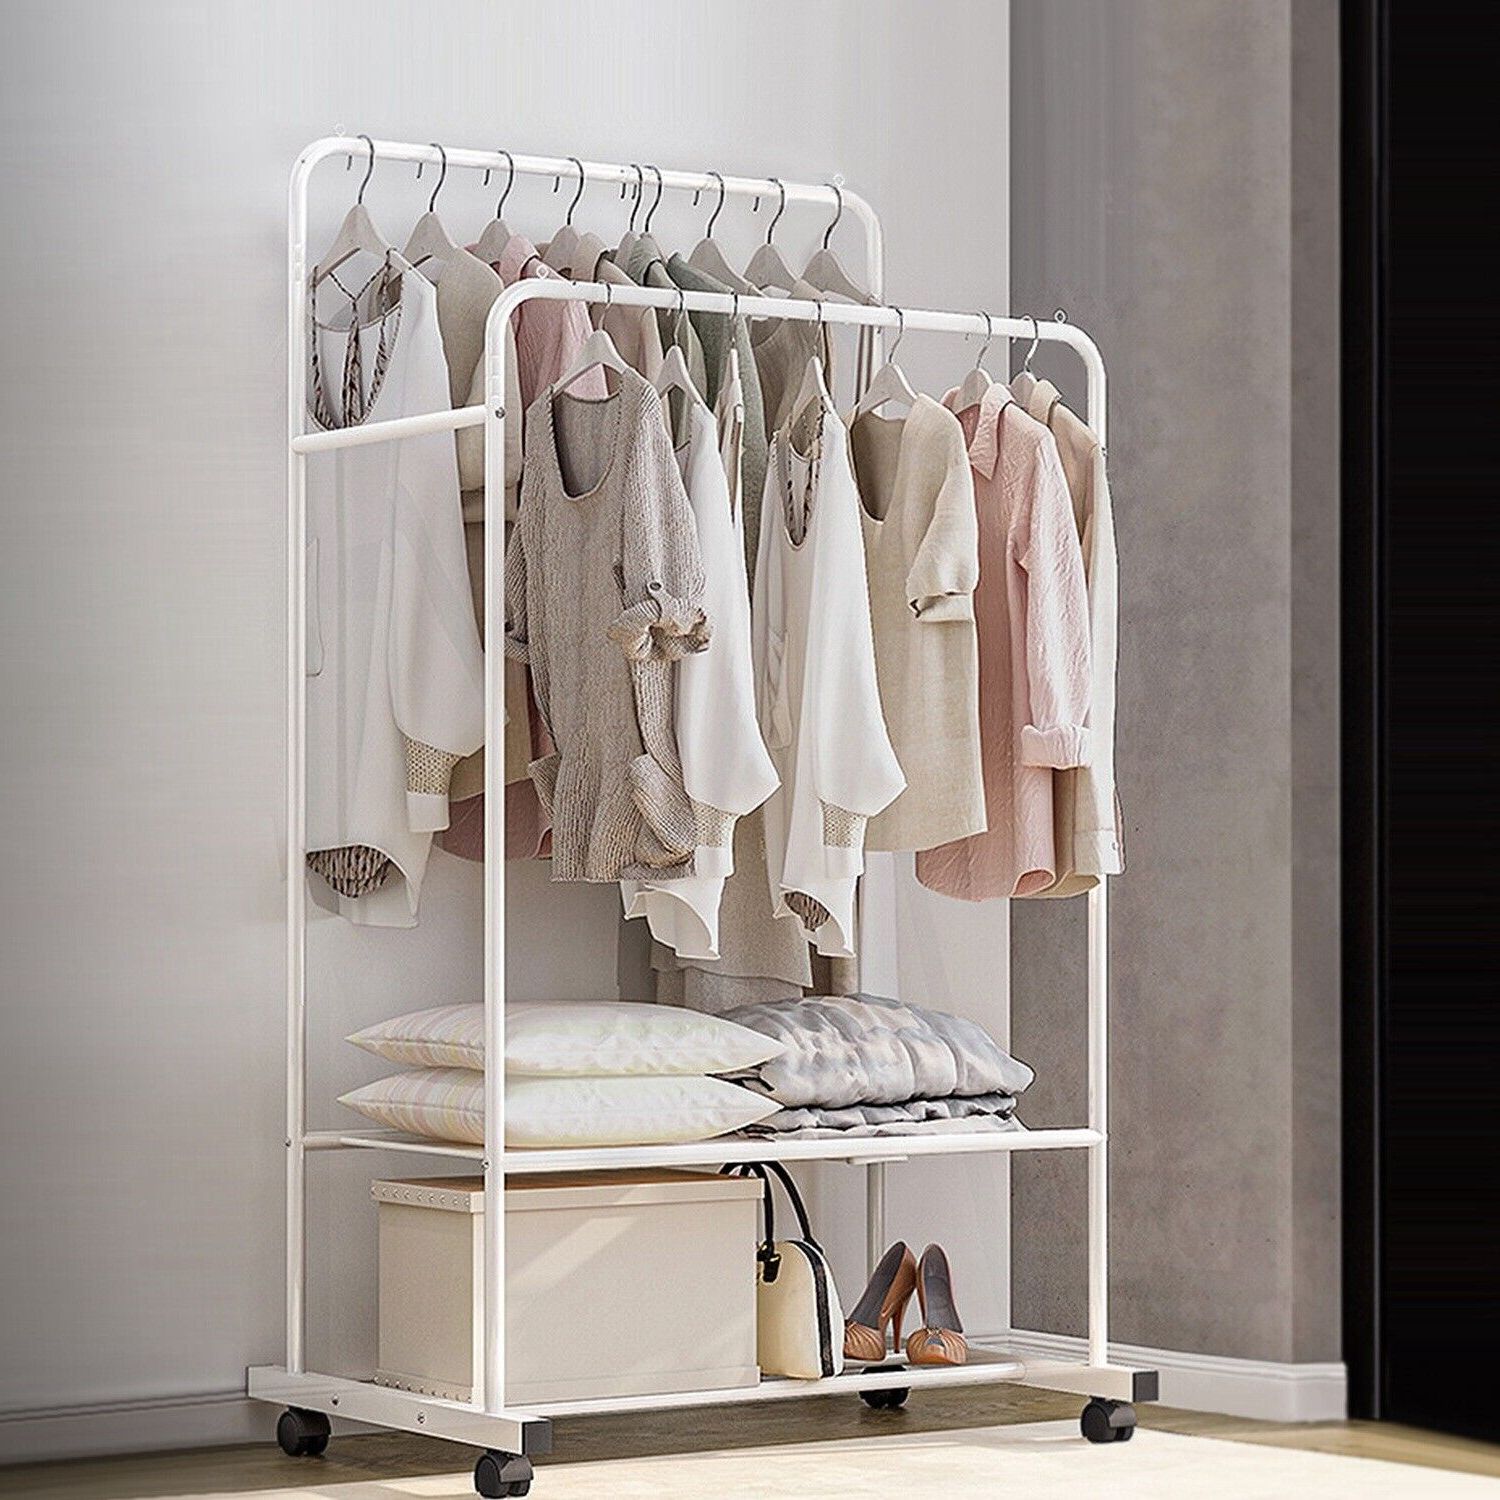 Garment Clothing Rack Double Rails Hanging Shelf Closet Storage W/rolling  Wheel | Ebay Intended For Double Hanging Rail For Wardrobes (Gallery 13 of 20)